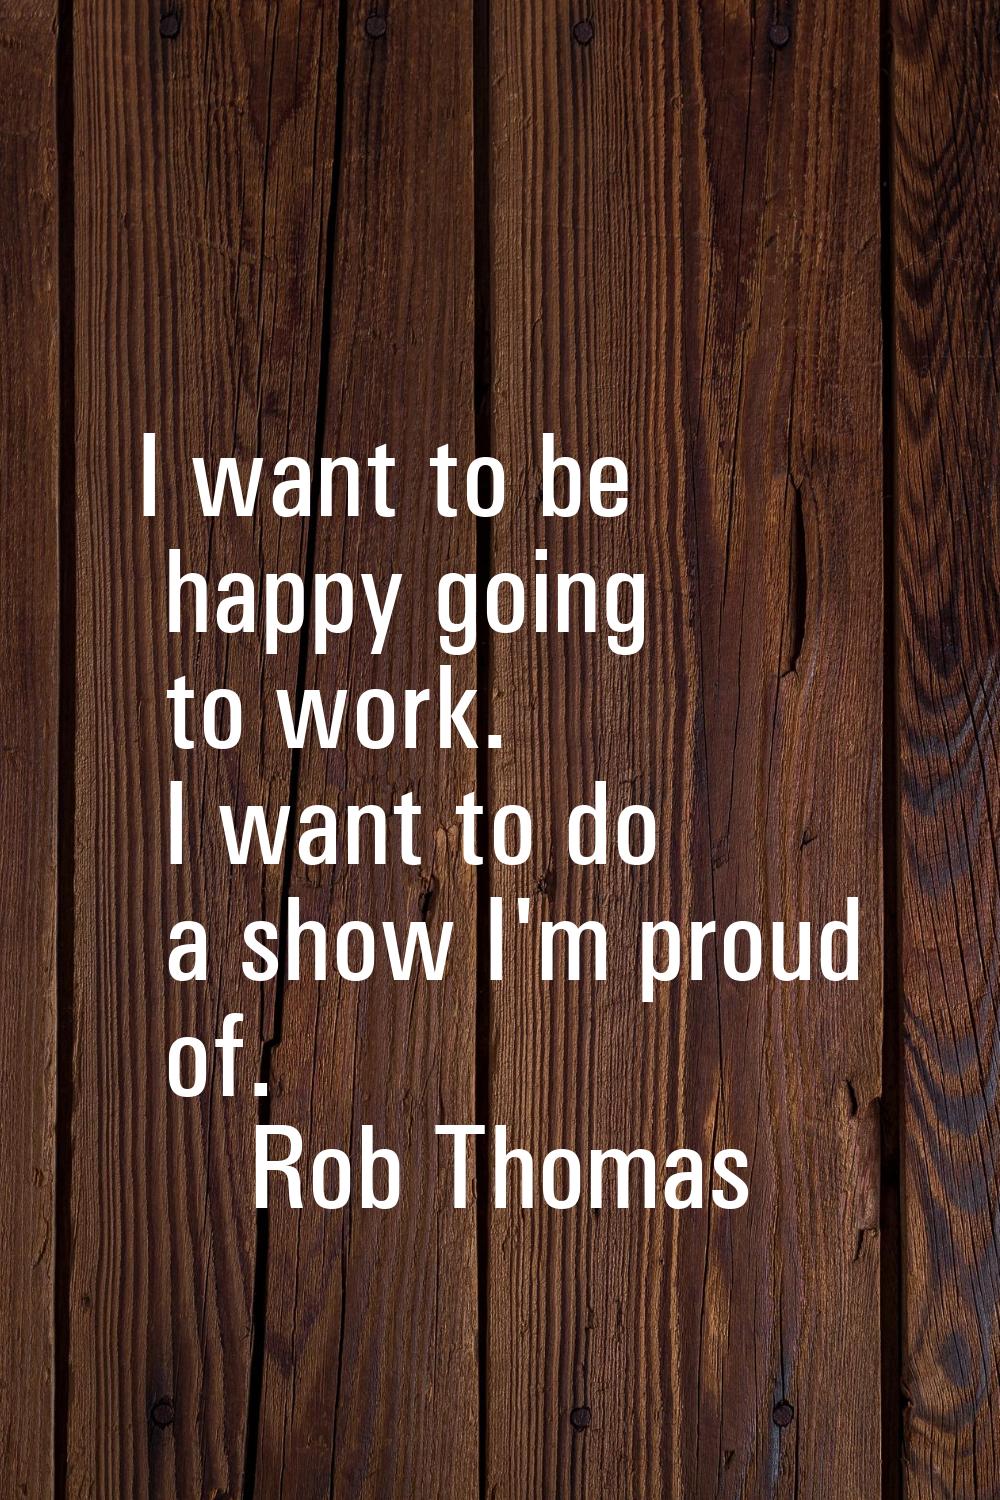 I want to be happy going to work. I want to do a show I'm proud of.